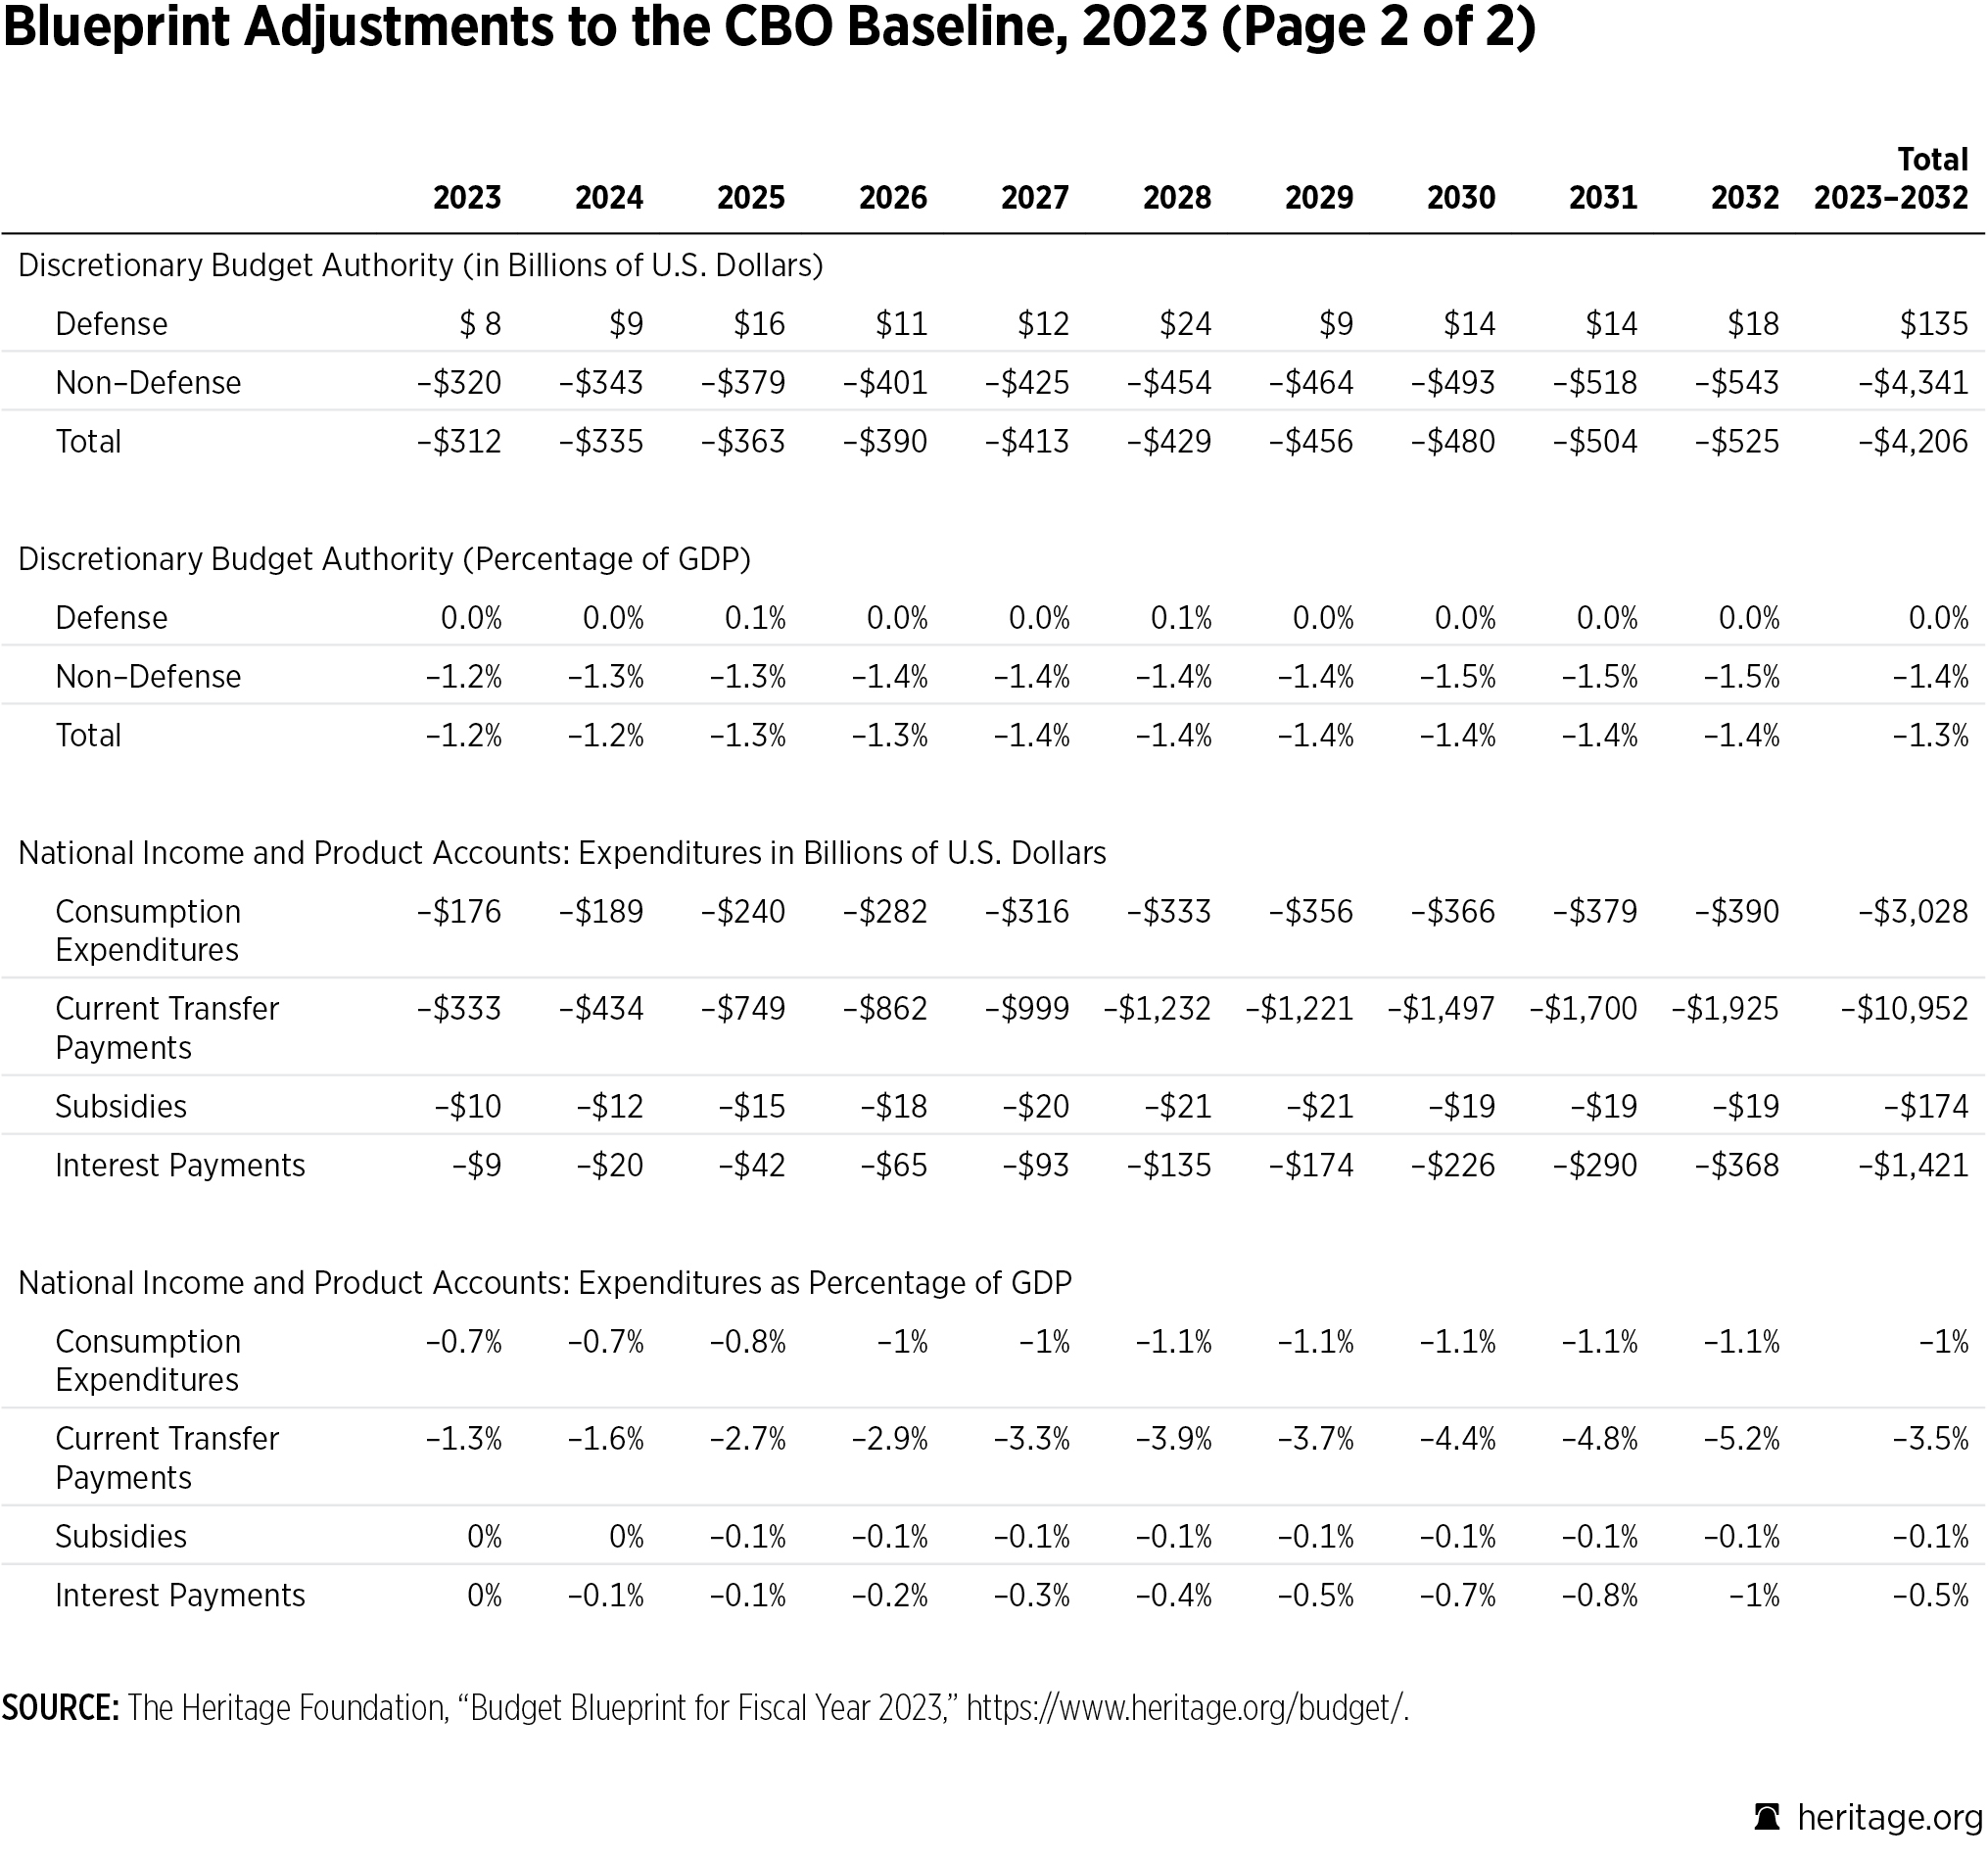 Budget Blueprint for FY 2023 Table: Blueprint Adjustments to the CBO Baseline Page 2 of 2